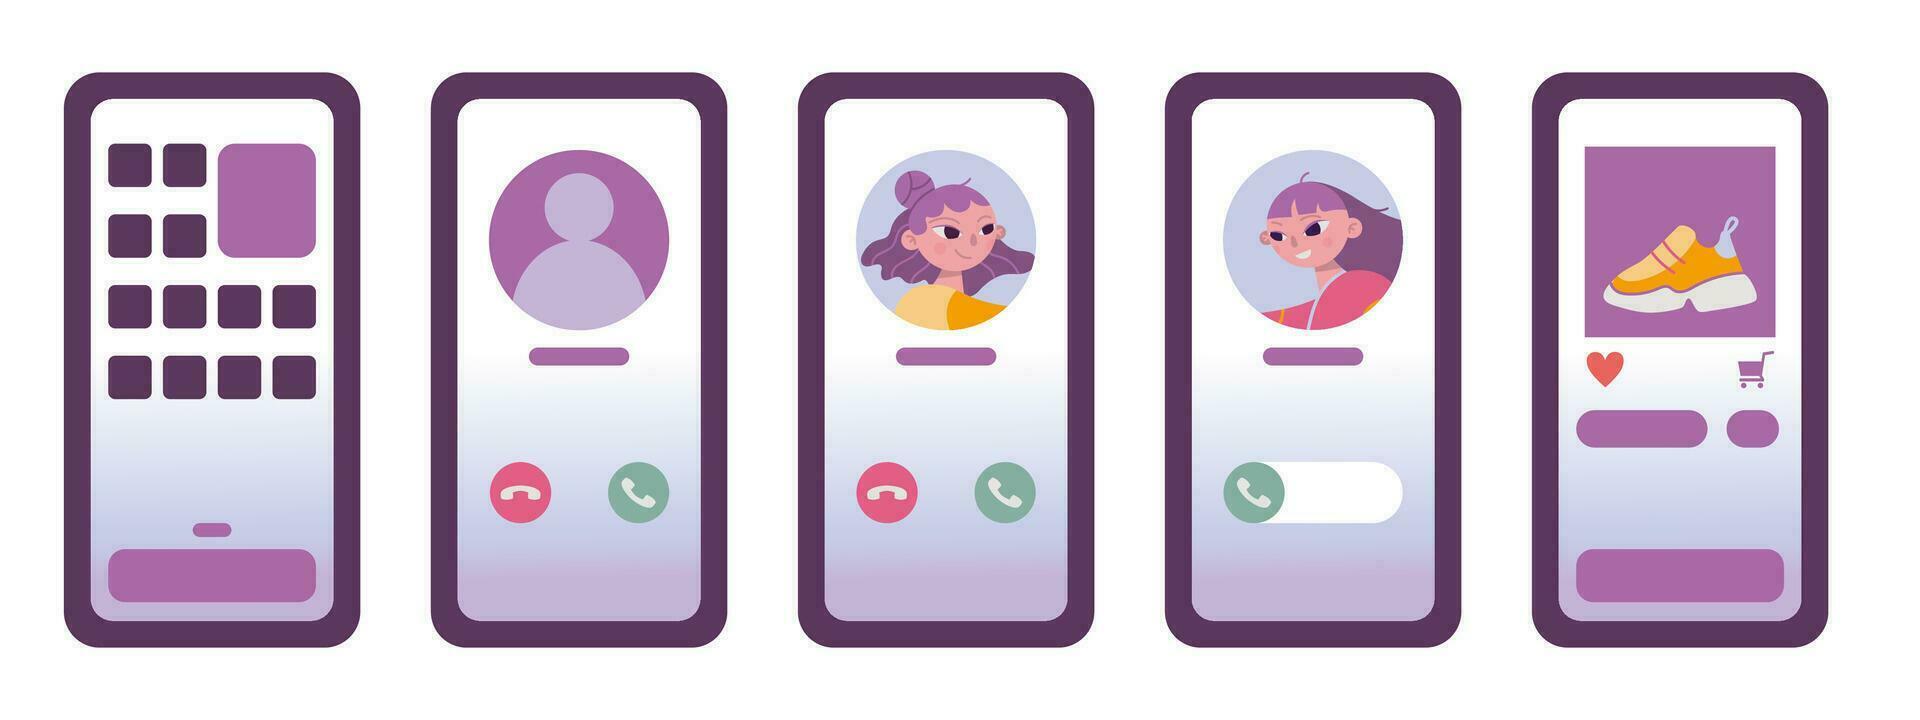 Set of cute smartphone screen interface, cartoon style. Incoming call, online store. Mobile phone display. Trendy modern vector illustration isolated on white background, hand drawn, flat